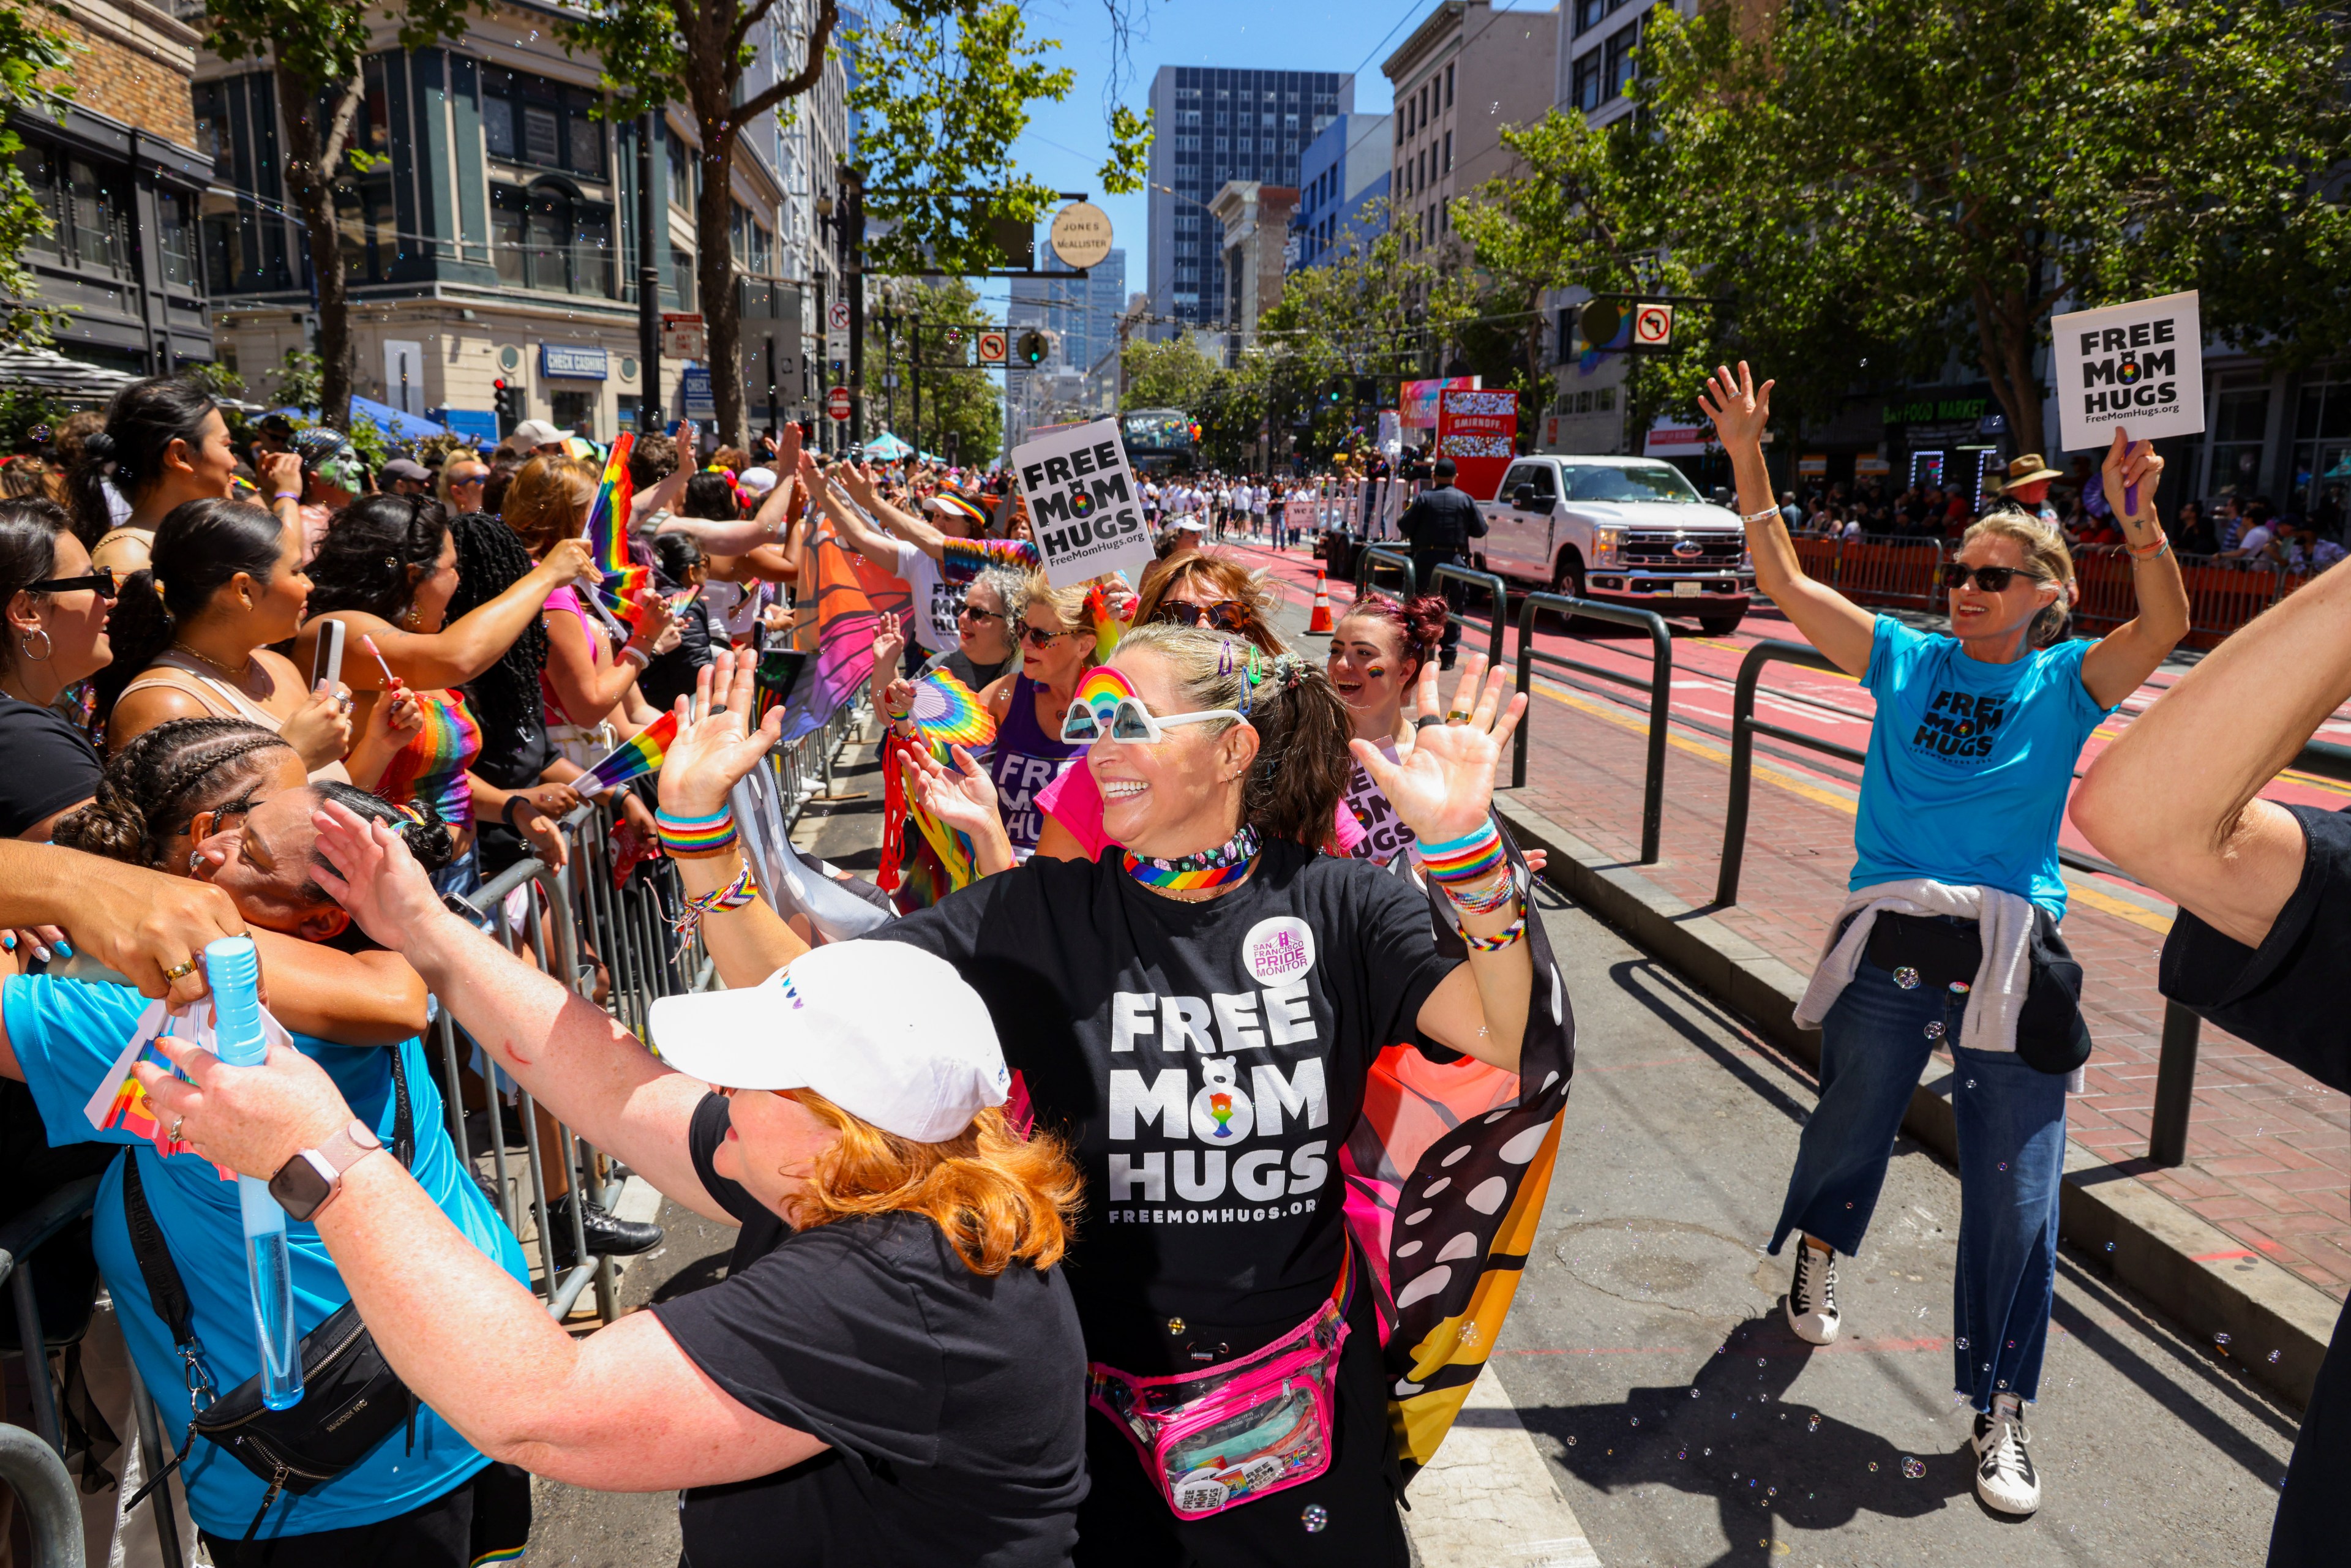 A group of people in colorful attire and &quot;Free Mom Hugs&quot; shirts interact joyfully with a cheering crowd behind a barrier on a sunlit urban street.